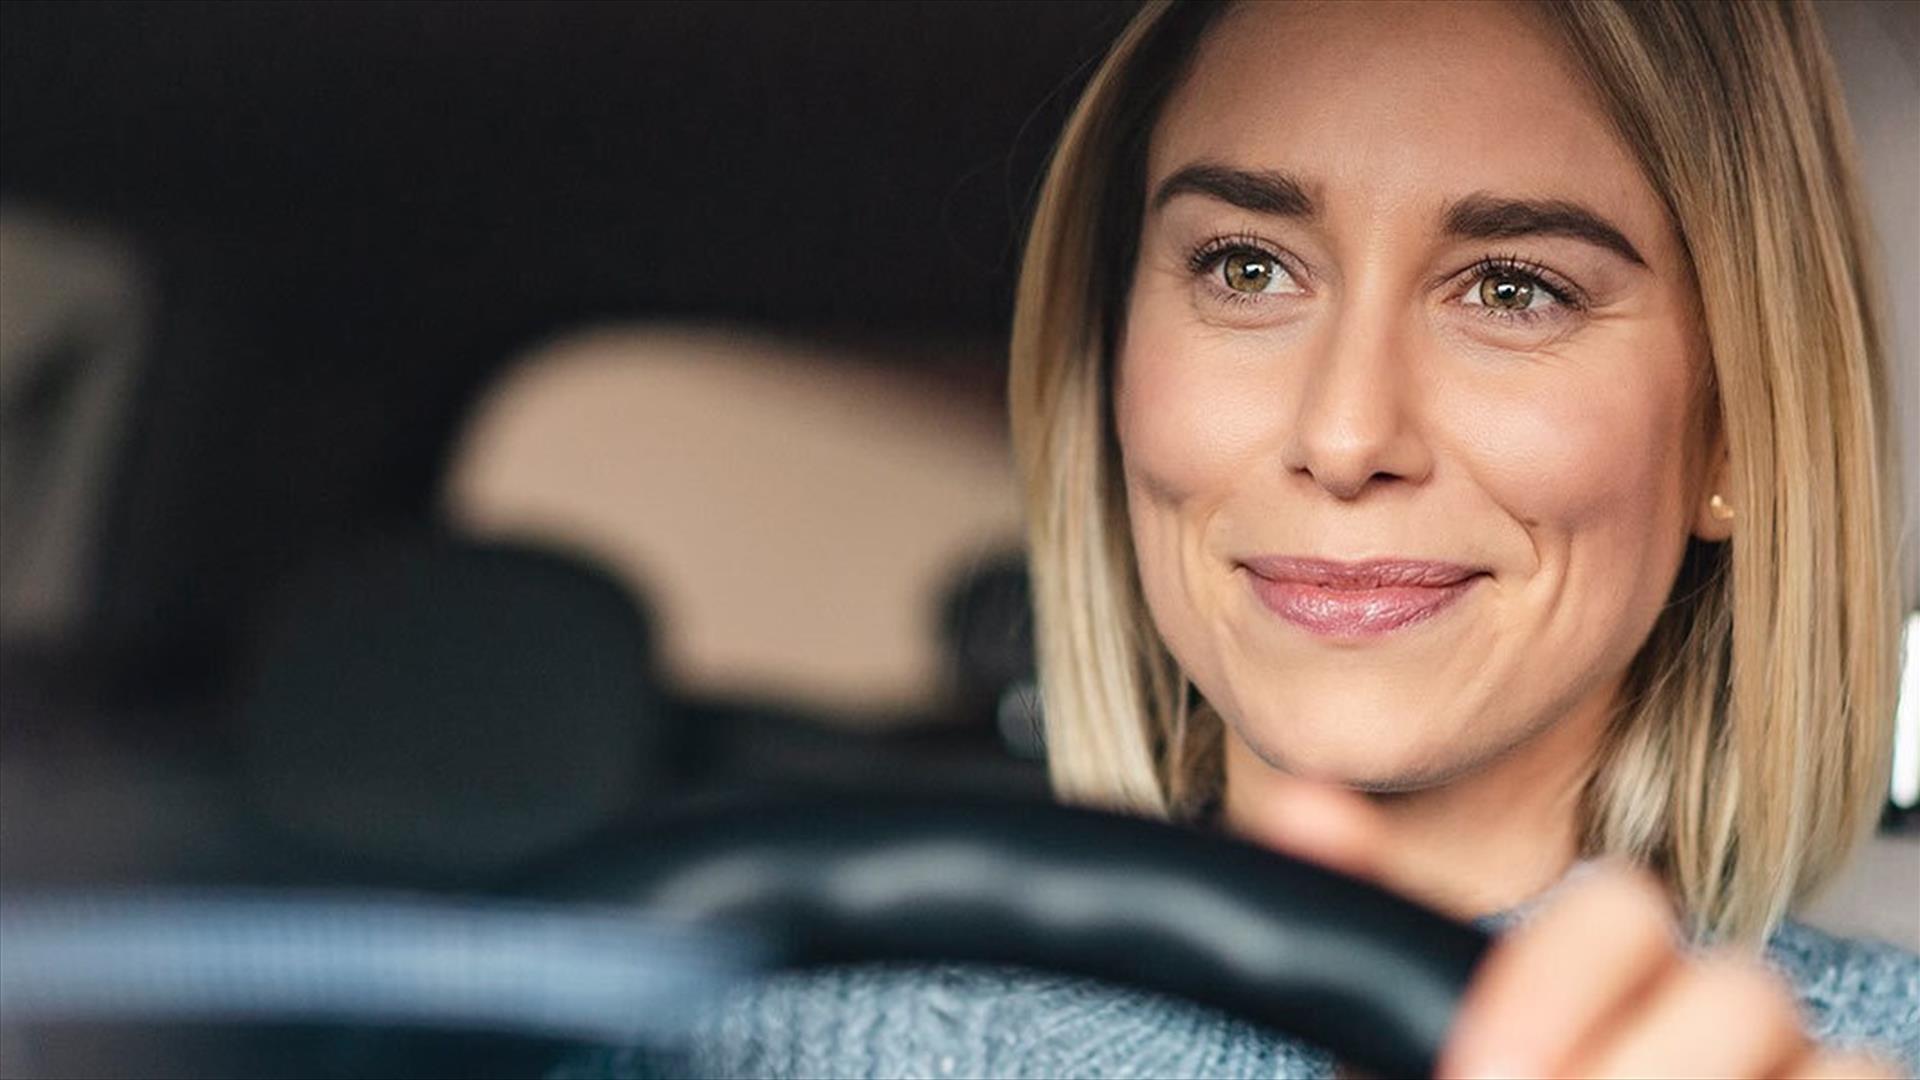 A smiling woman with her hands on the steering wheel of a car.